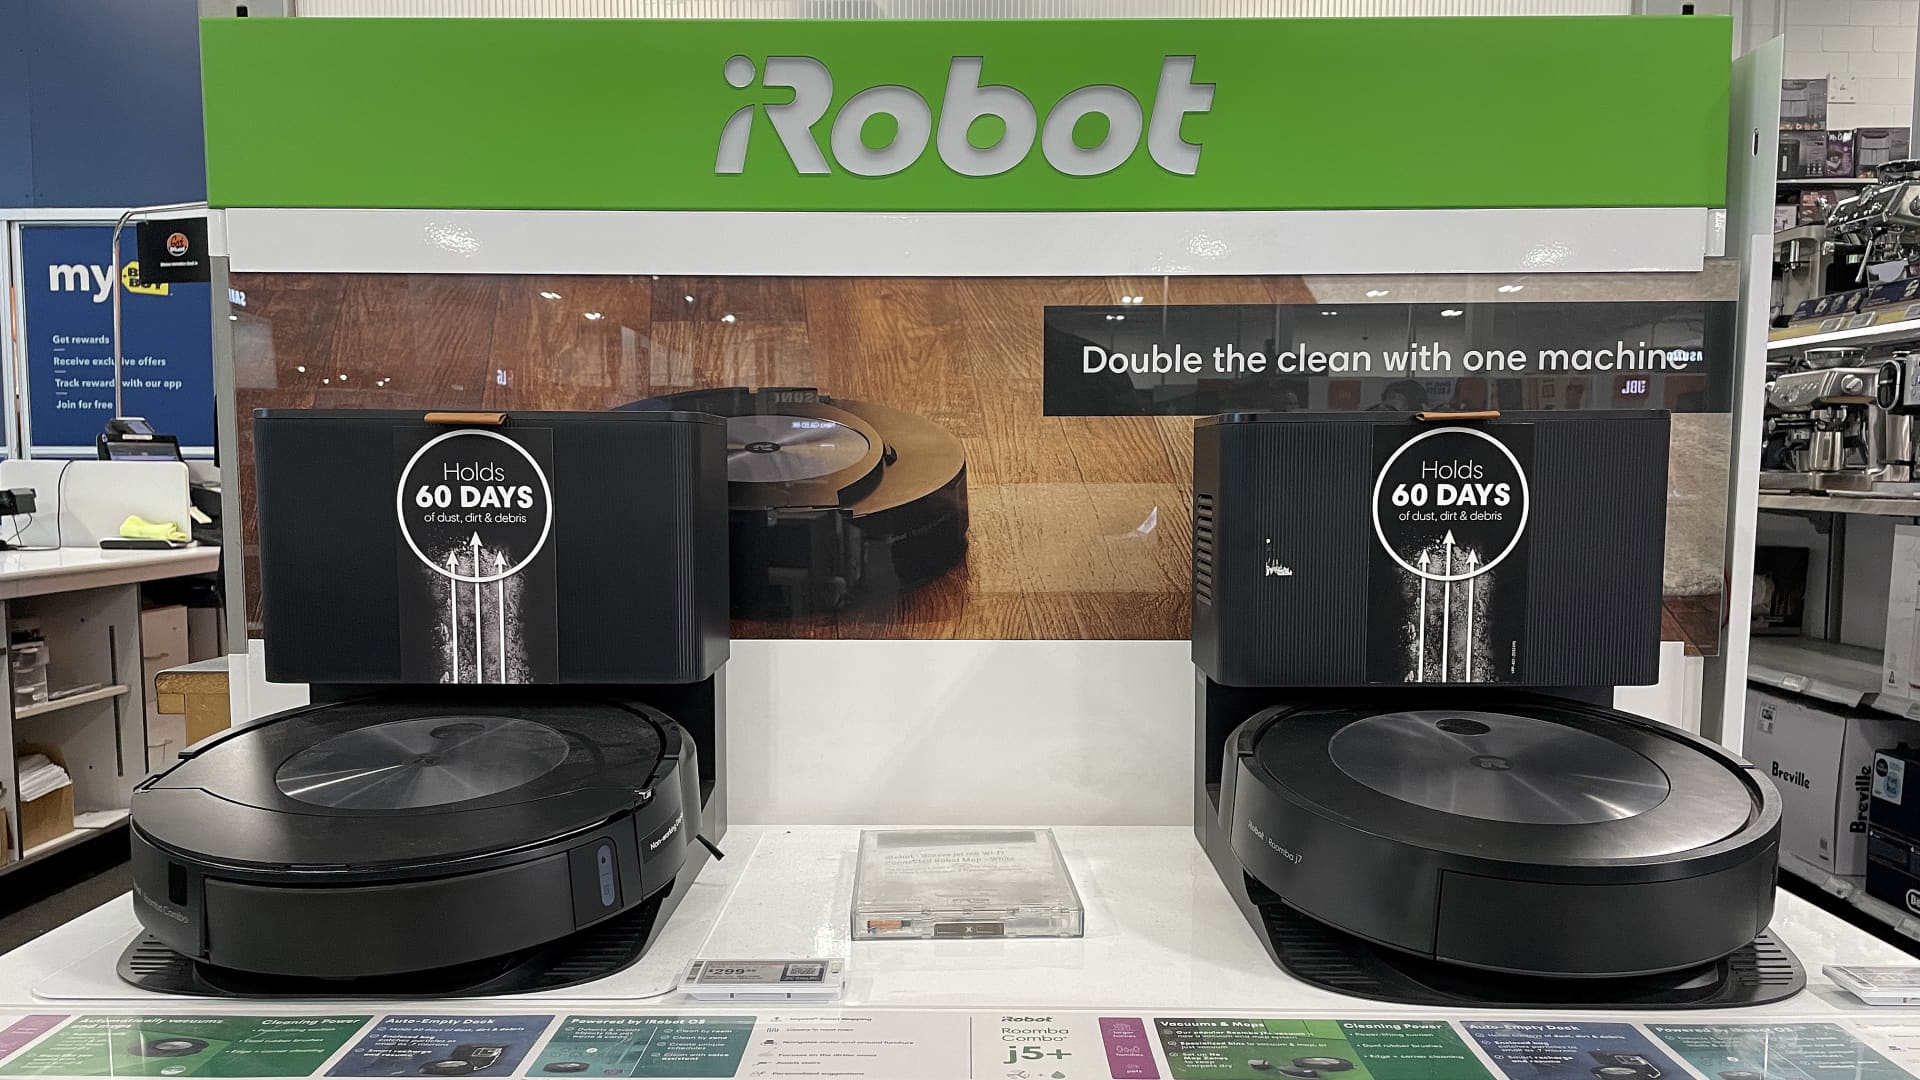 terminates iRobot deal, Roomba maker to lay off 31% of staff